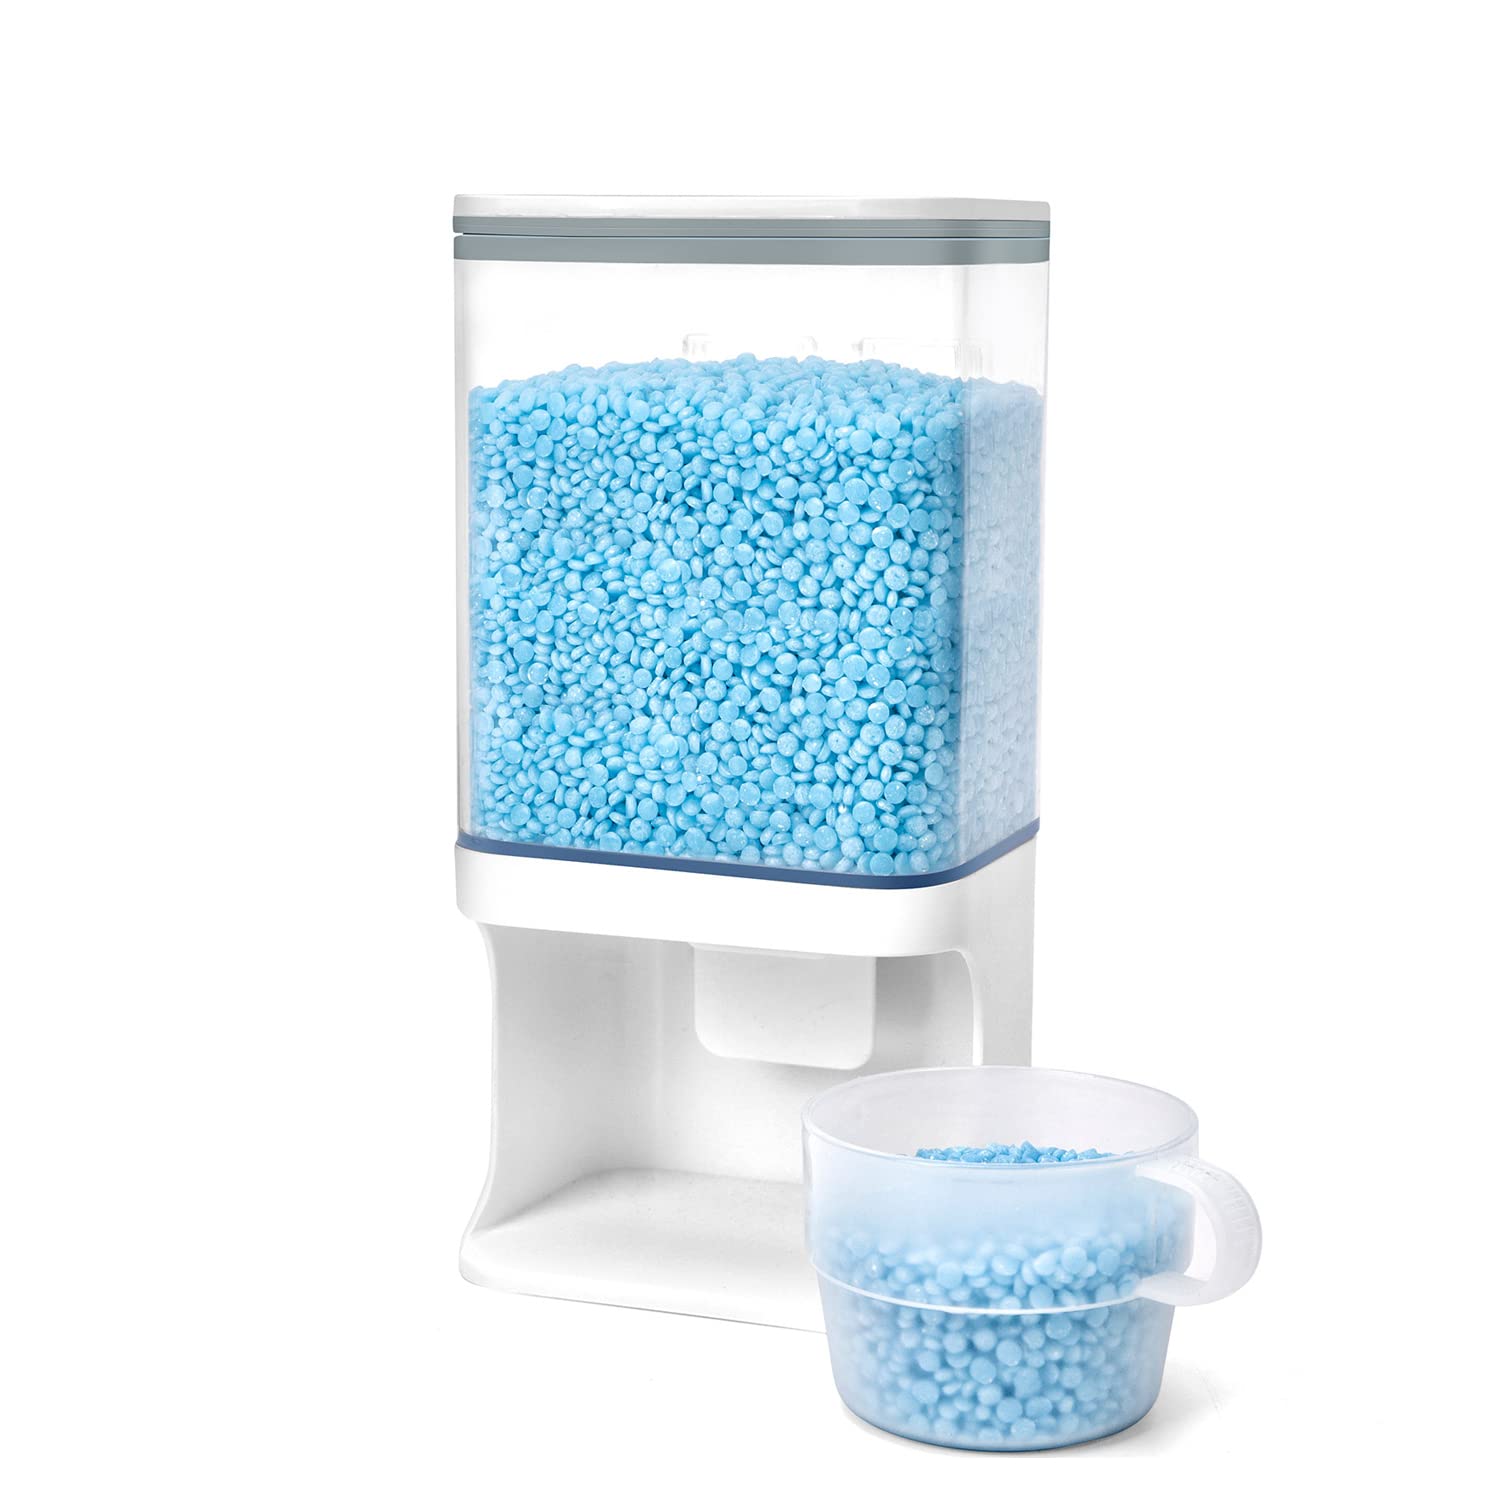 Conworld Cereal Dispenser Countertop, Large Capacity Rice